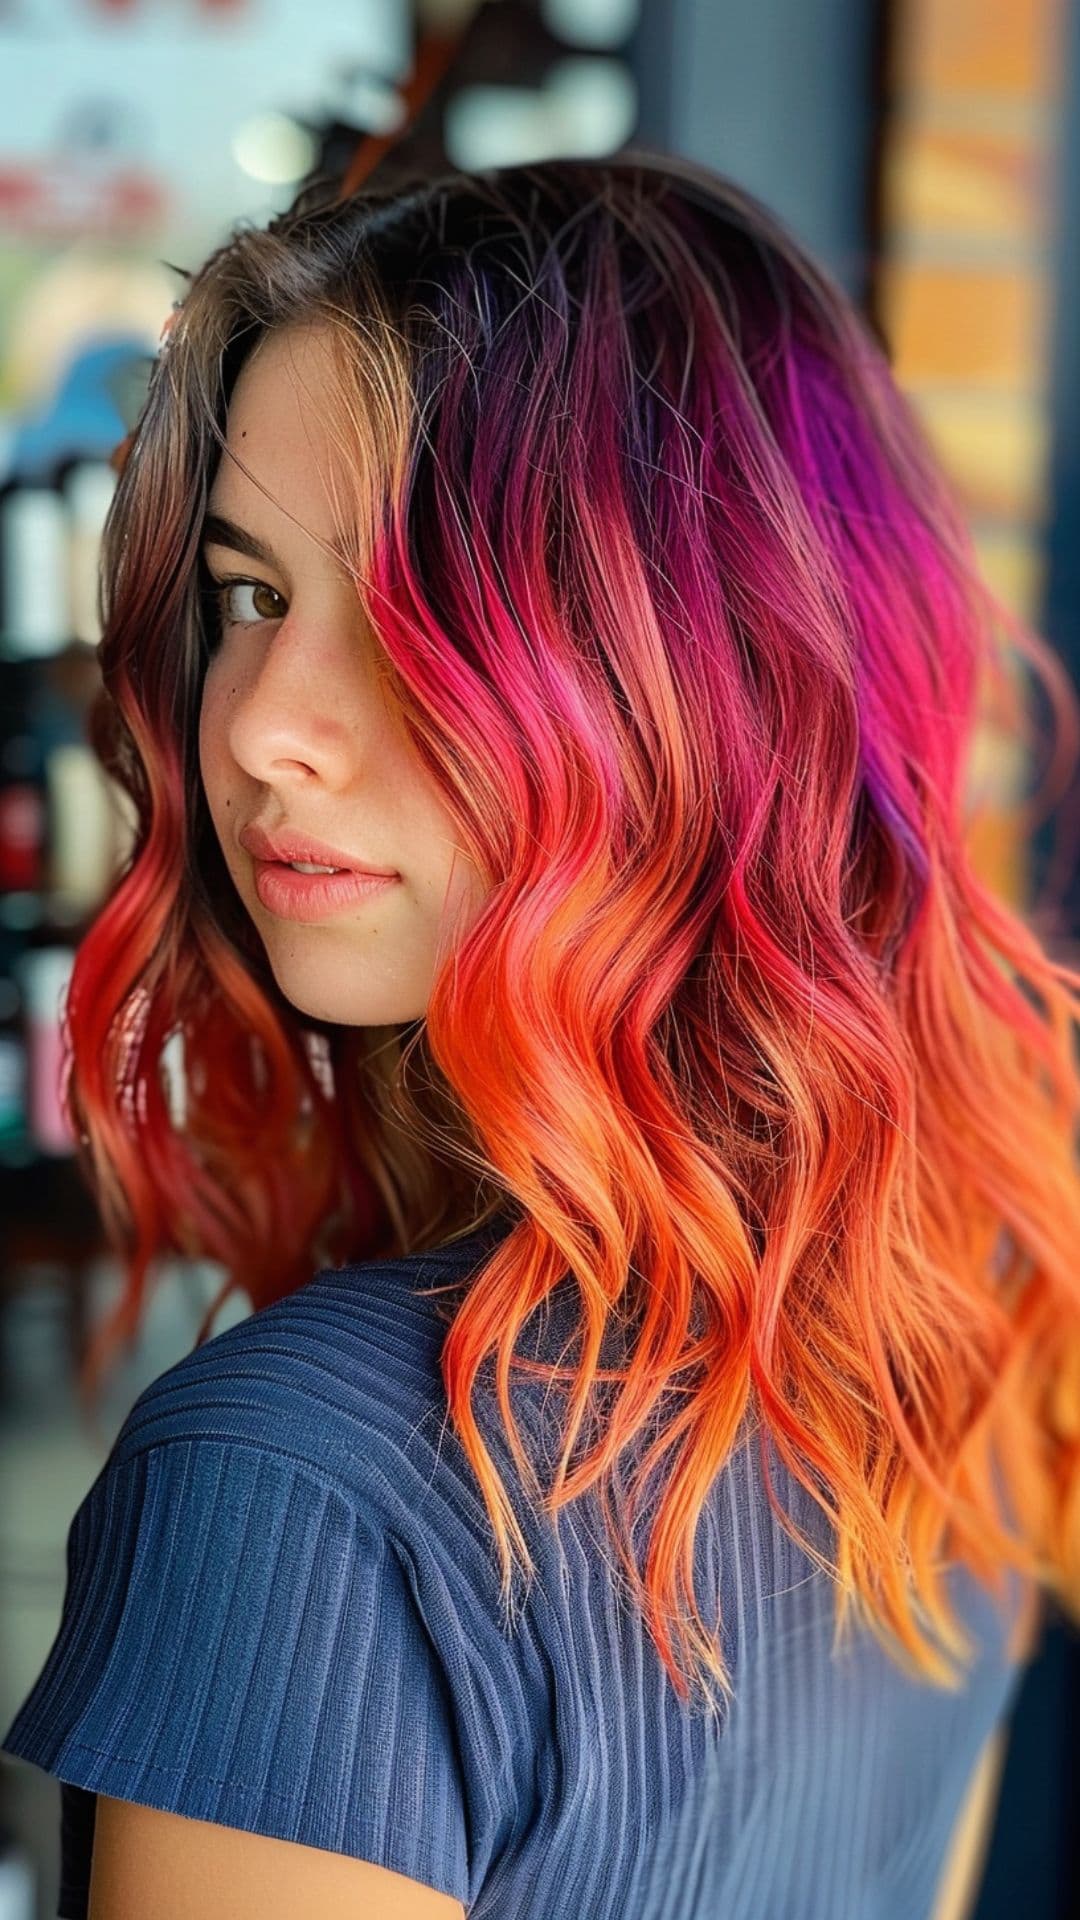 A young woman modelling a sunset hair.